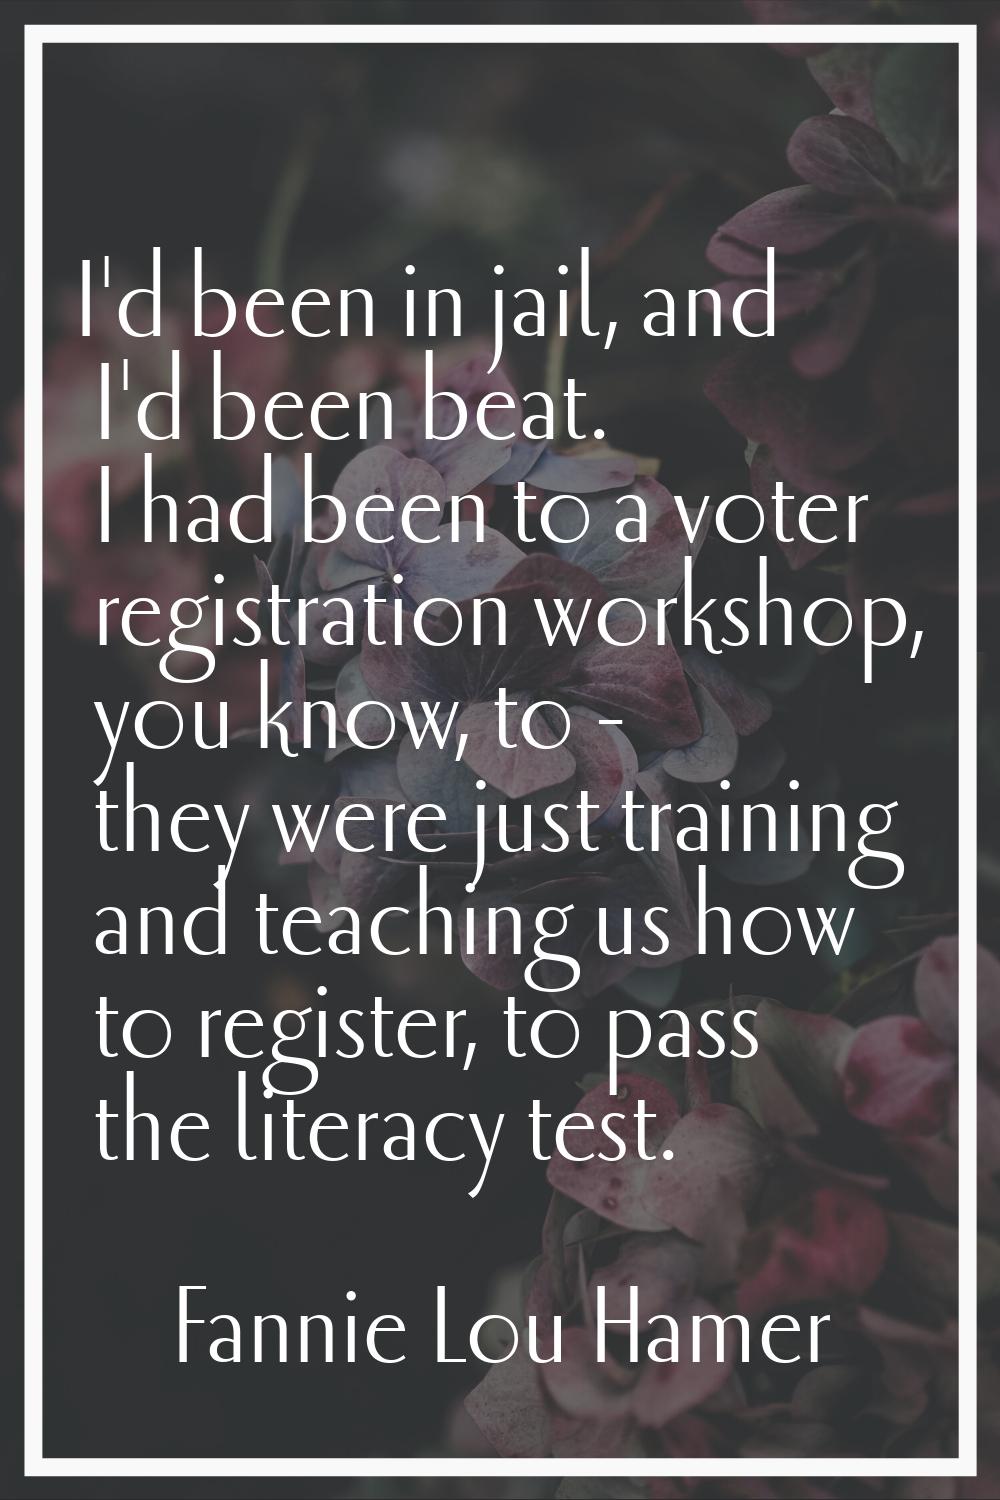 I'd been in jail, and I'd been beat. I had been to a voter registration workshop, you know, to - th